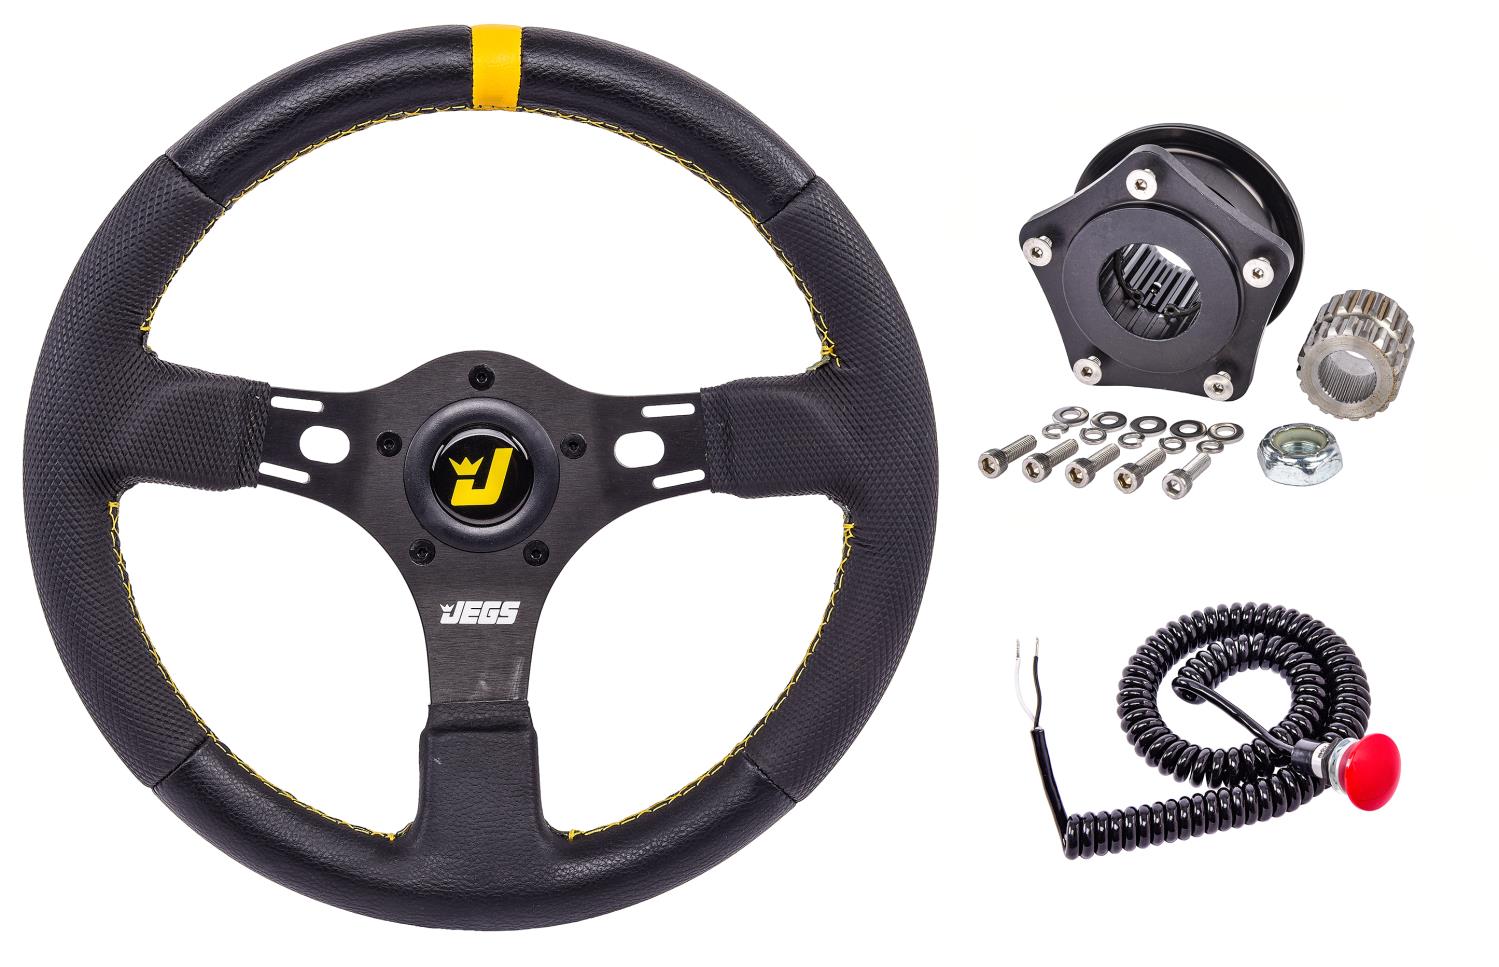 Premium Drag Race Steering Wheel Kit with Quick Release GM Splined Hub and Micro Switch